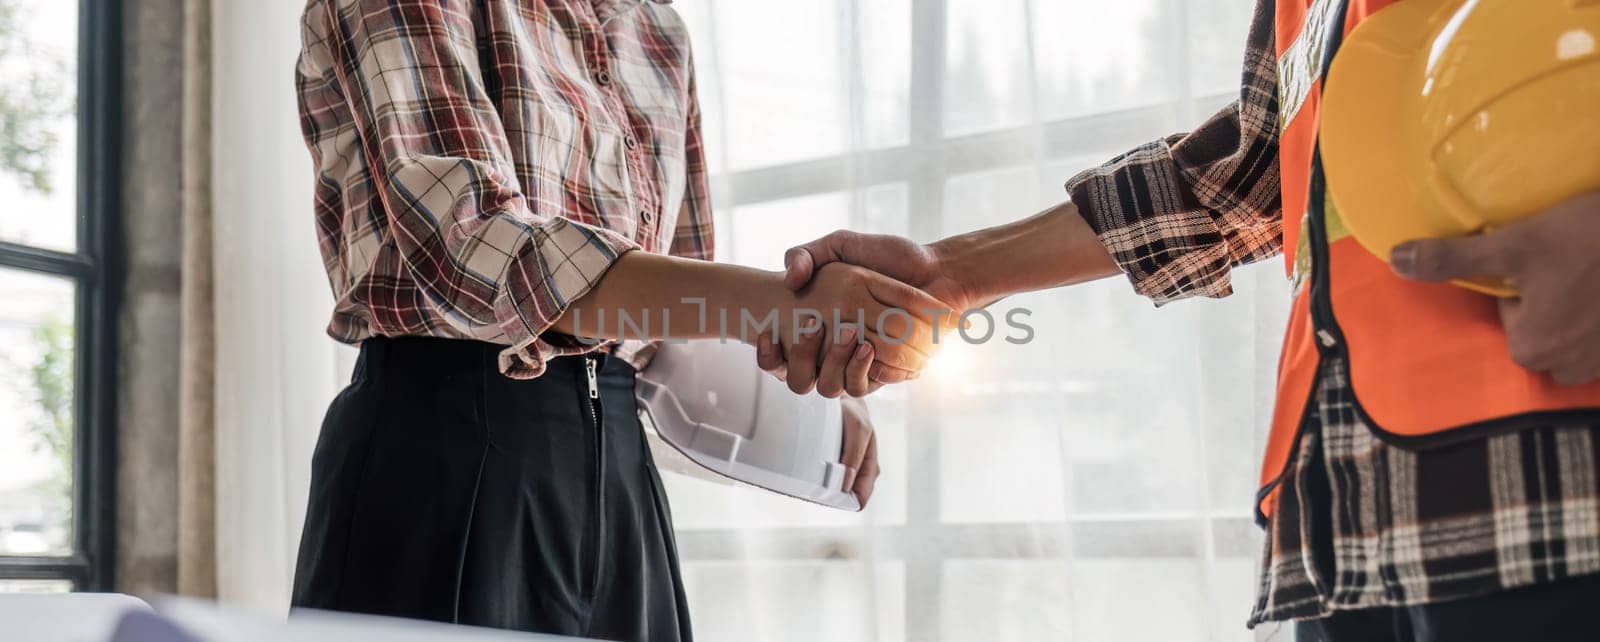 Architect and engineer construction workers shaking hands while working for teamwork and cooperation concept after finish an agreement in the office construction site, success collaboration concept..